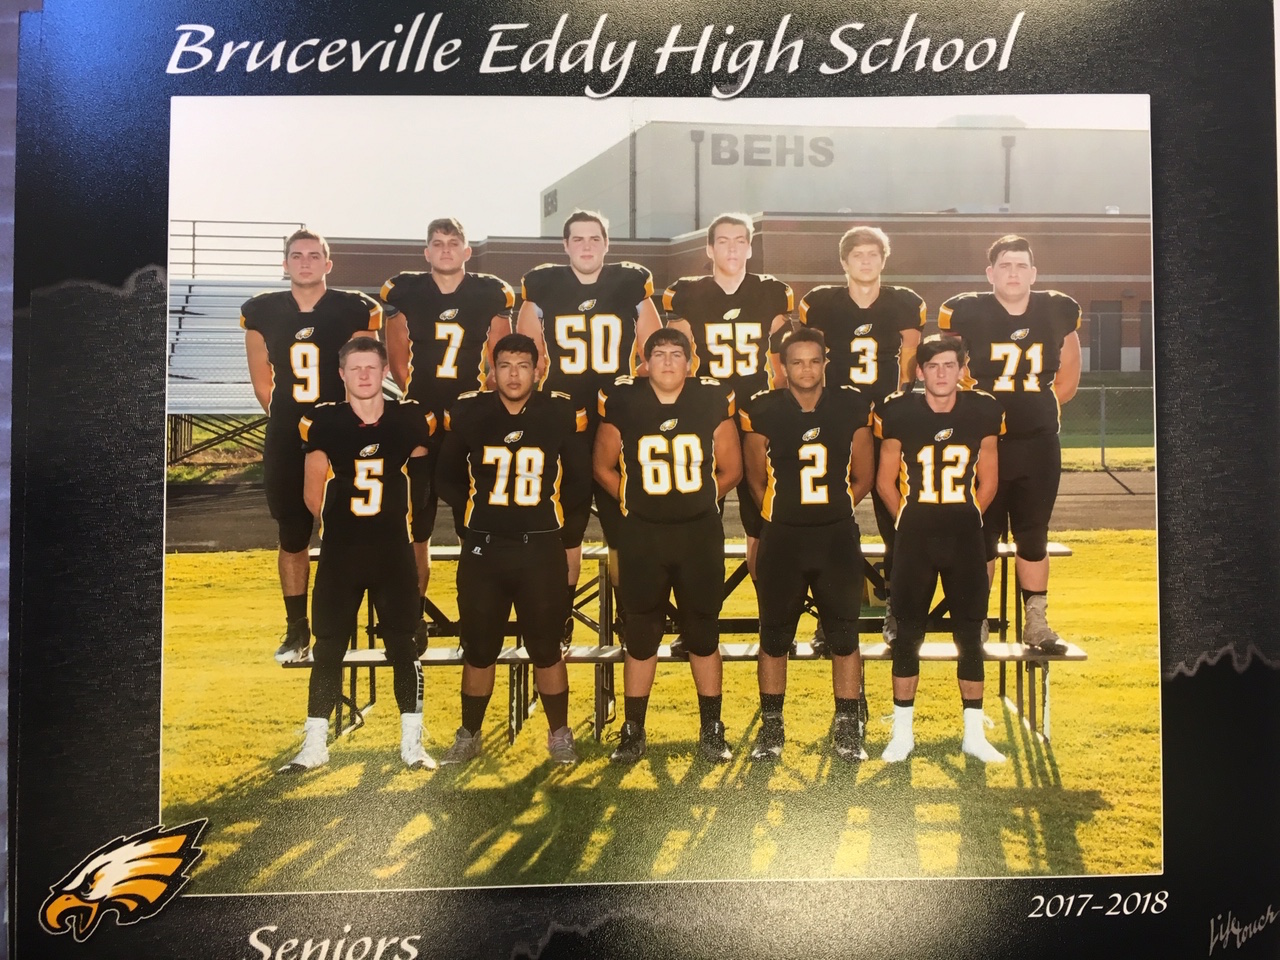 BrucevilleEddy Ready For Spotlight After Ending 32 Year Playoff Drought